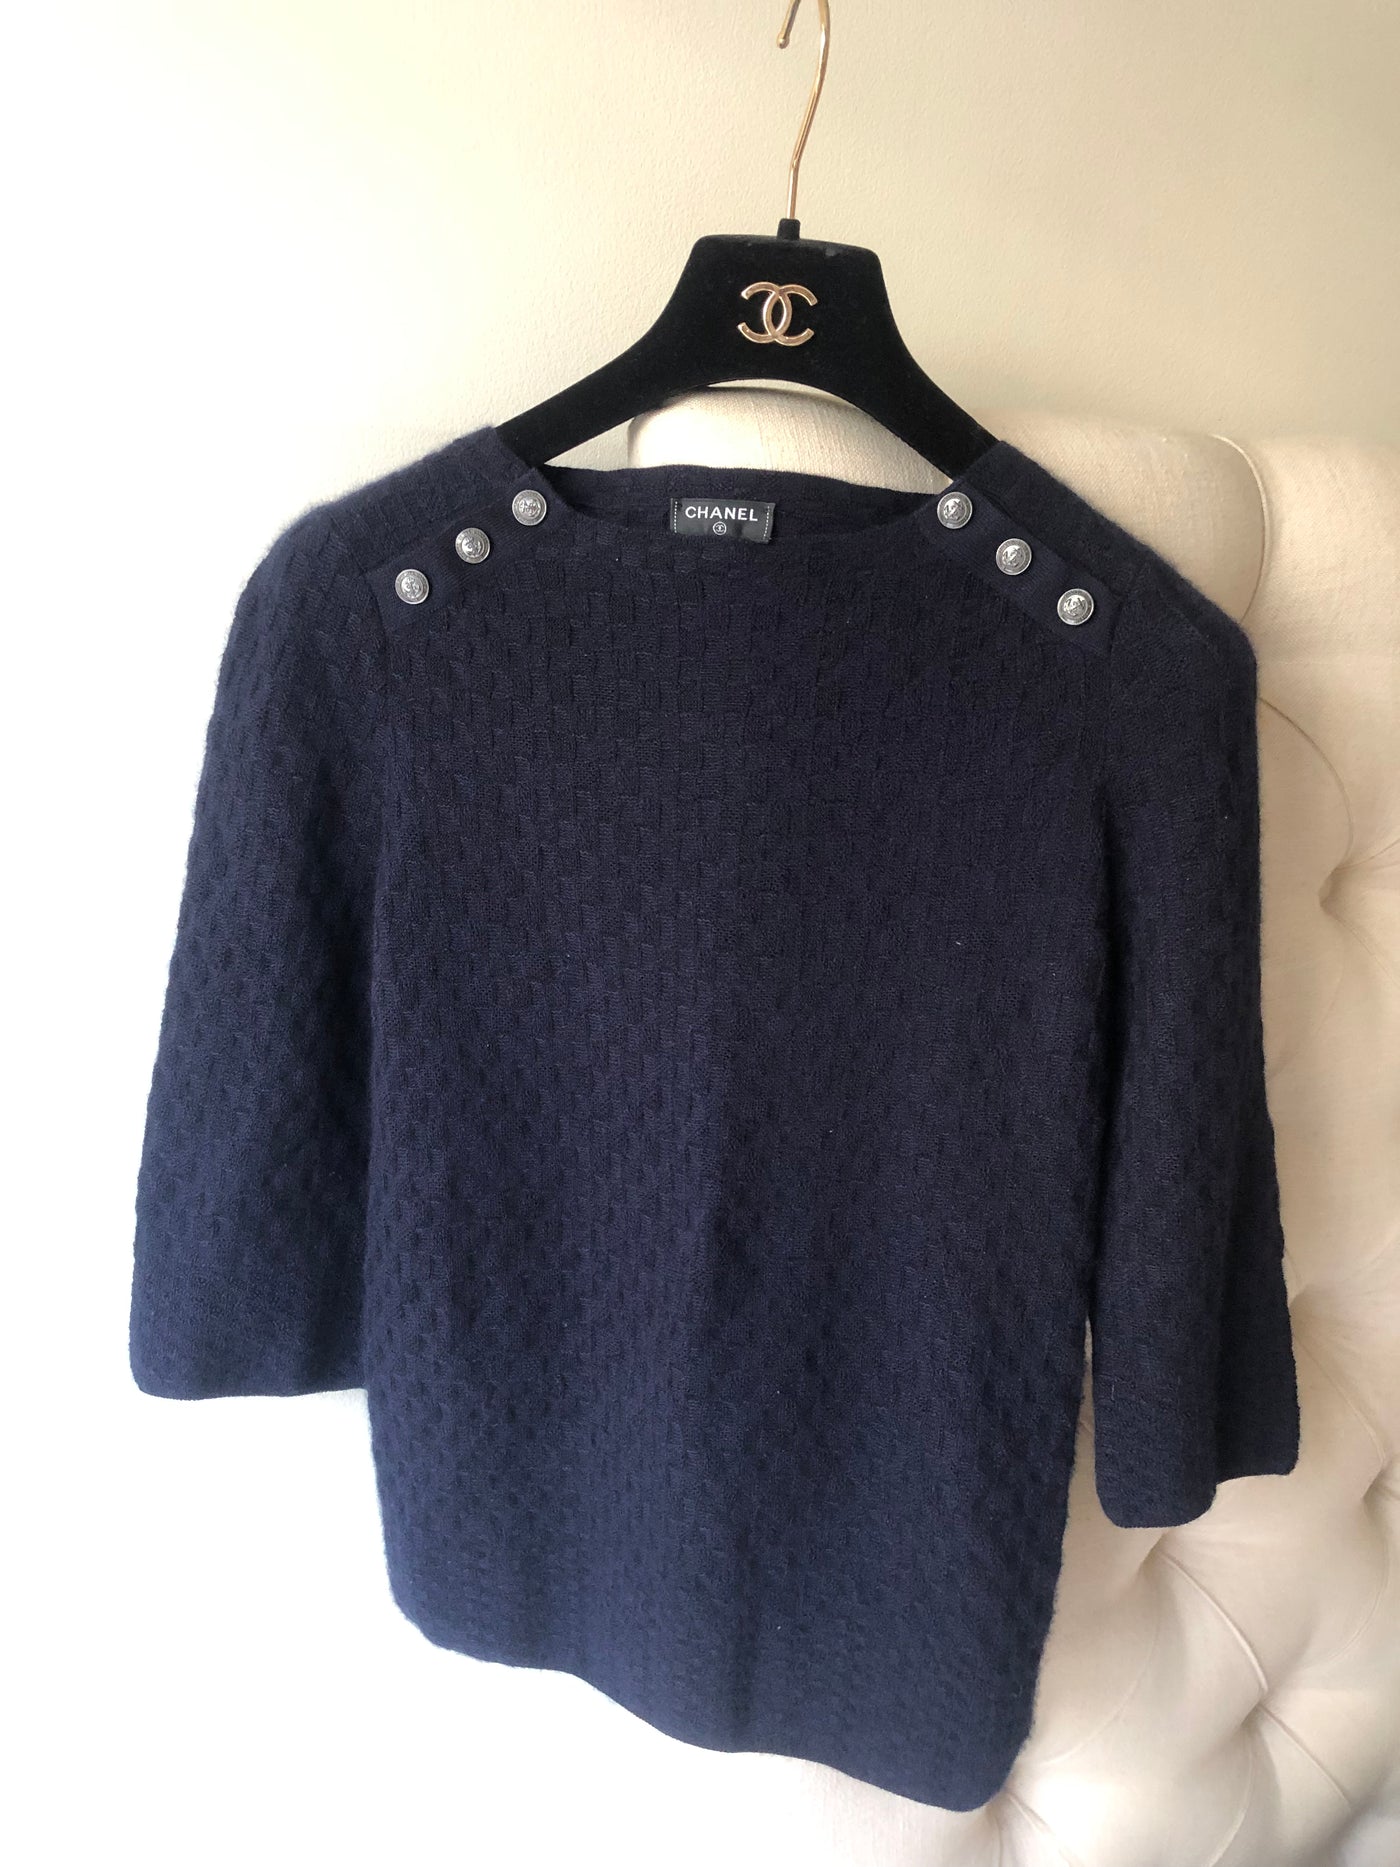 CHANEL cashmere knit top size 34 navy blue